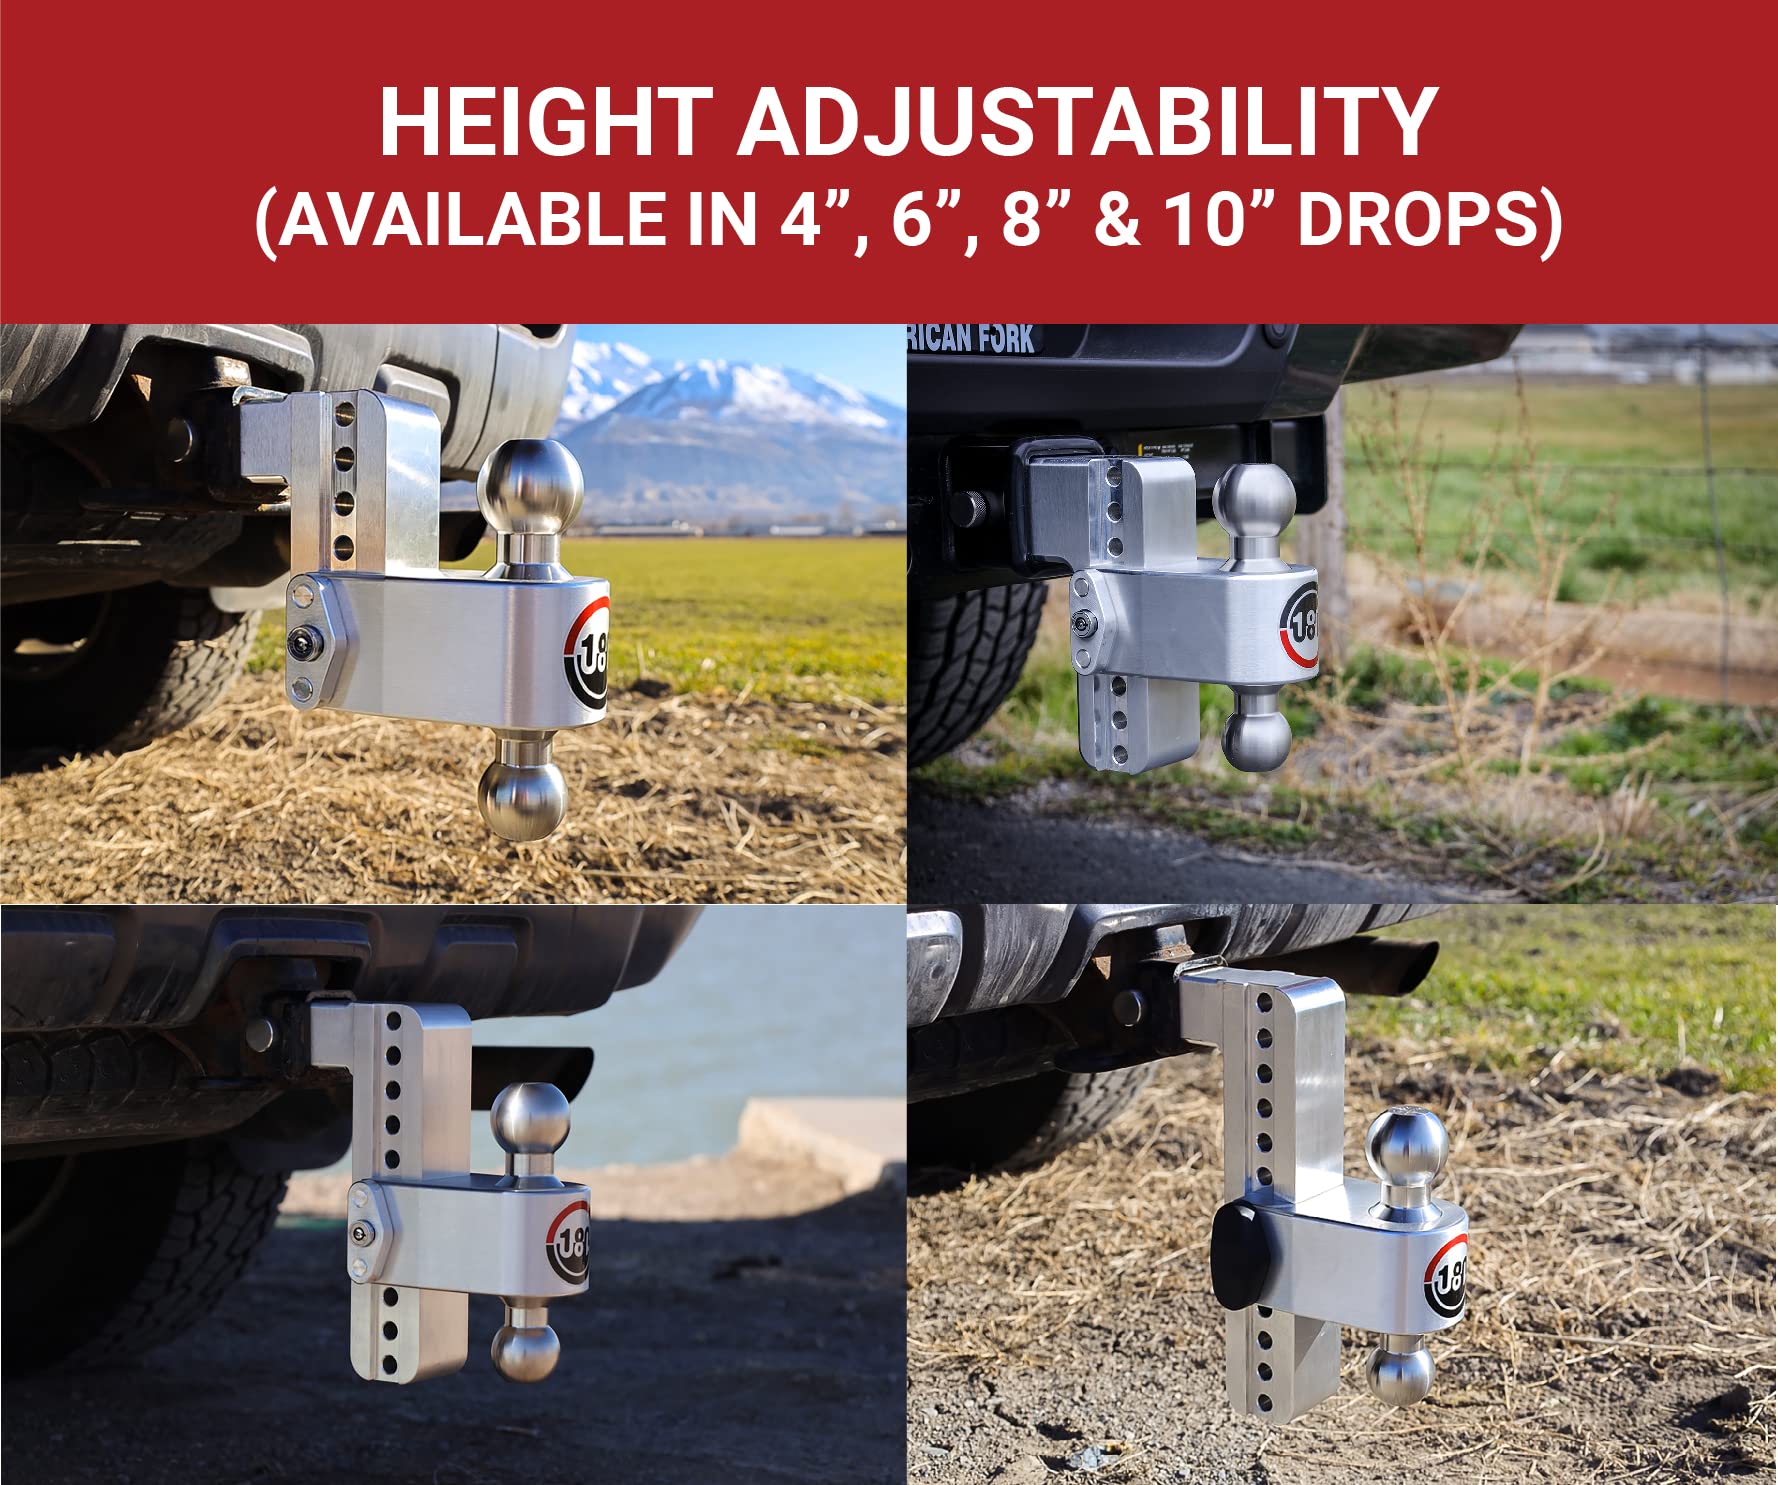 Weigh Safe Adjustable Trailer Hitch Ball Mount - 6" Adjustable Drop Hitch for 2.5" Receiver - Premium Heavy Duty Aluminum Traile